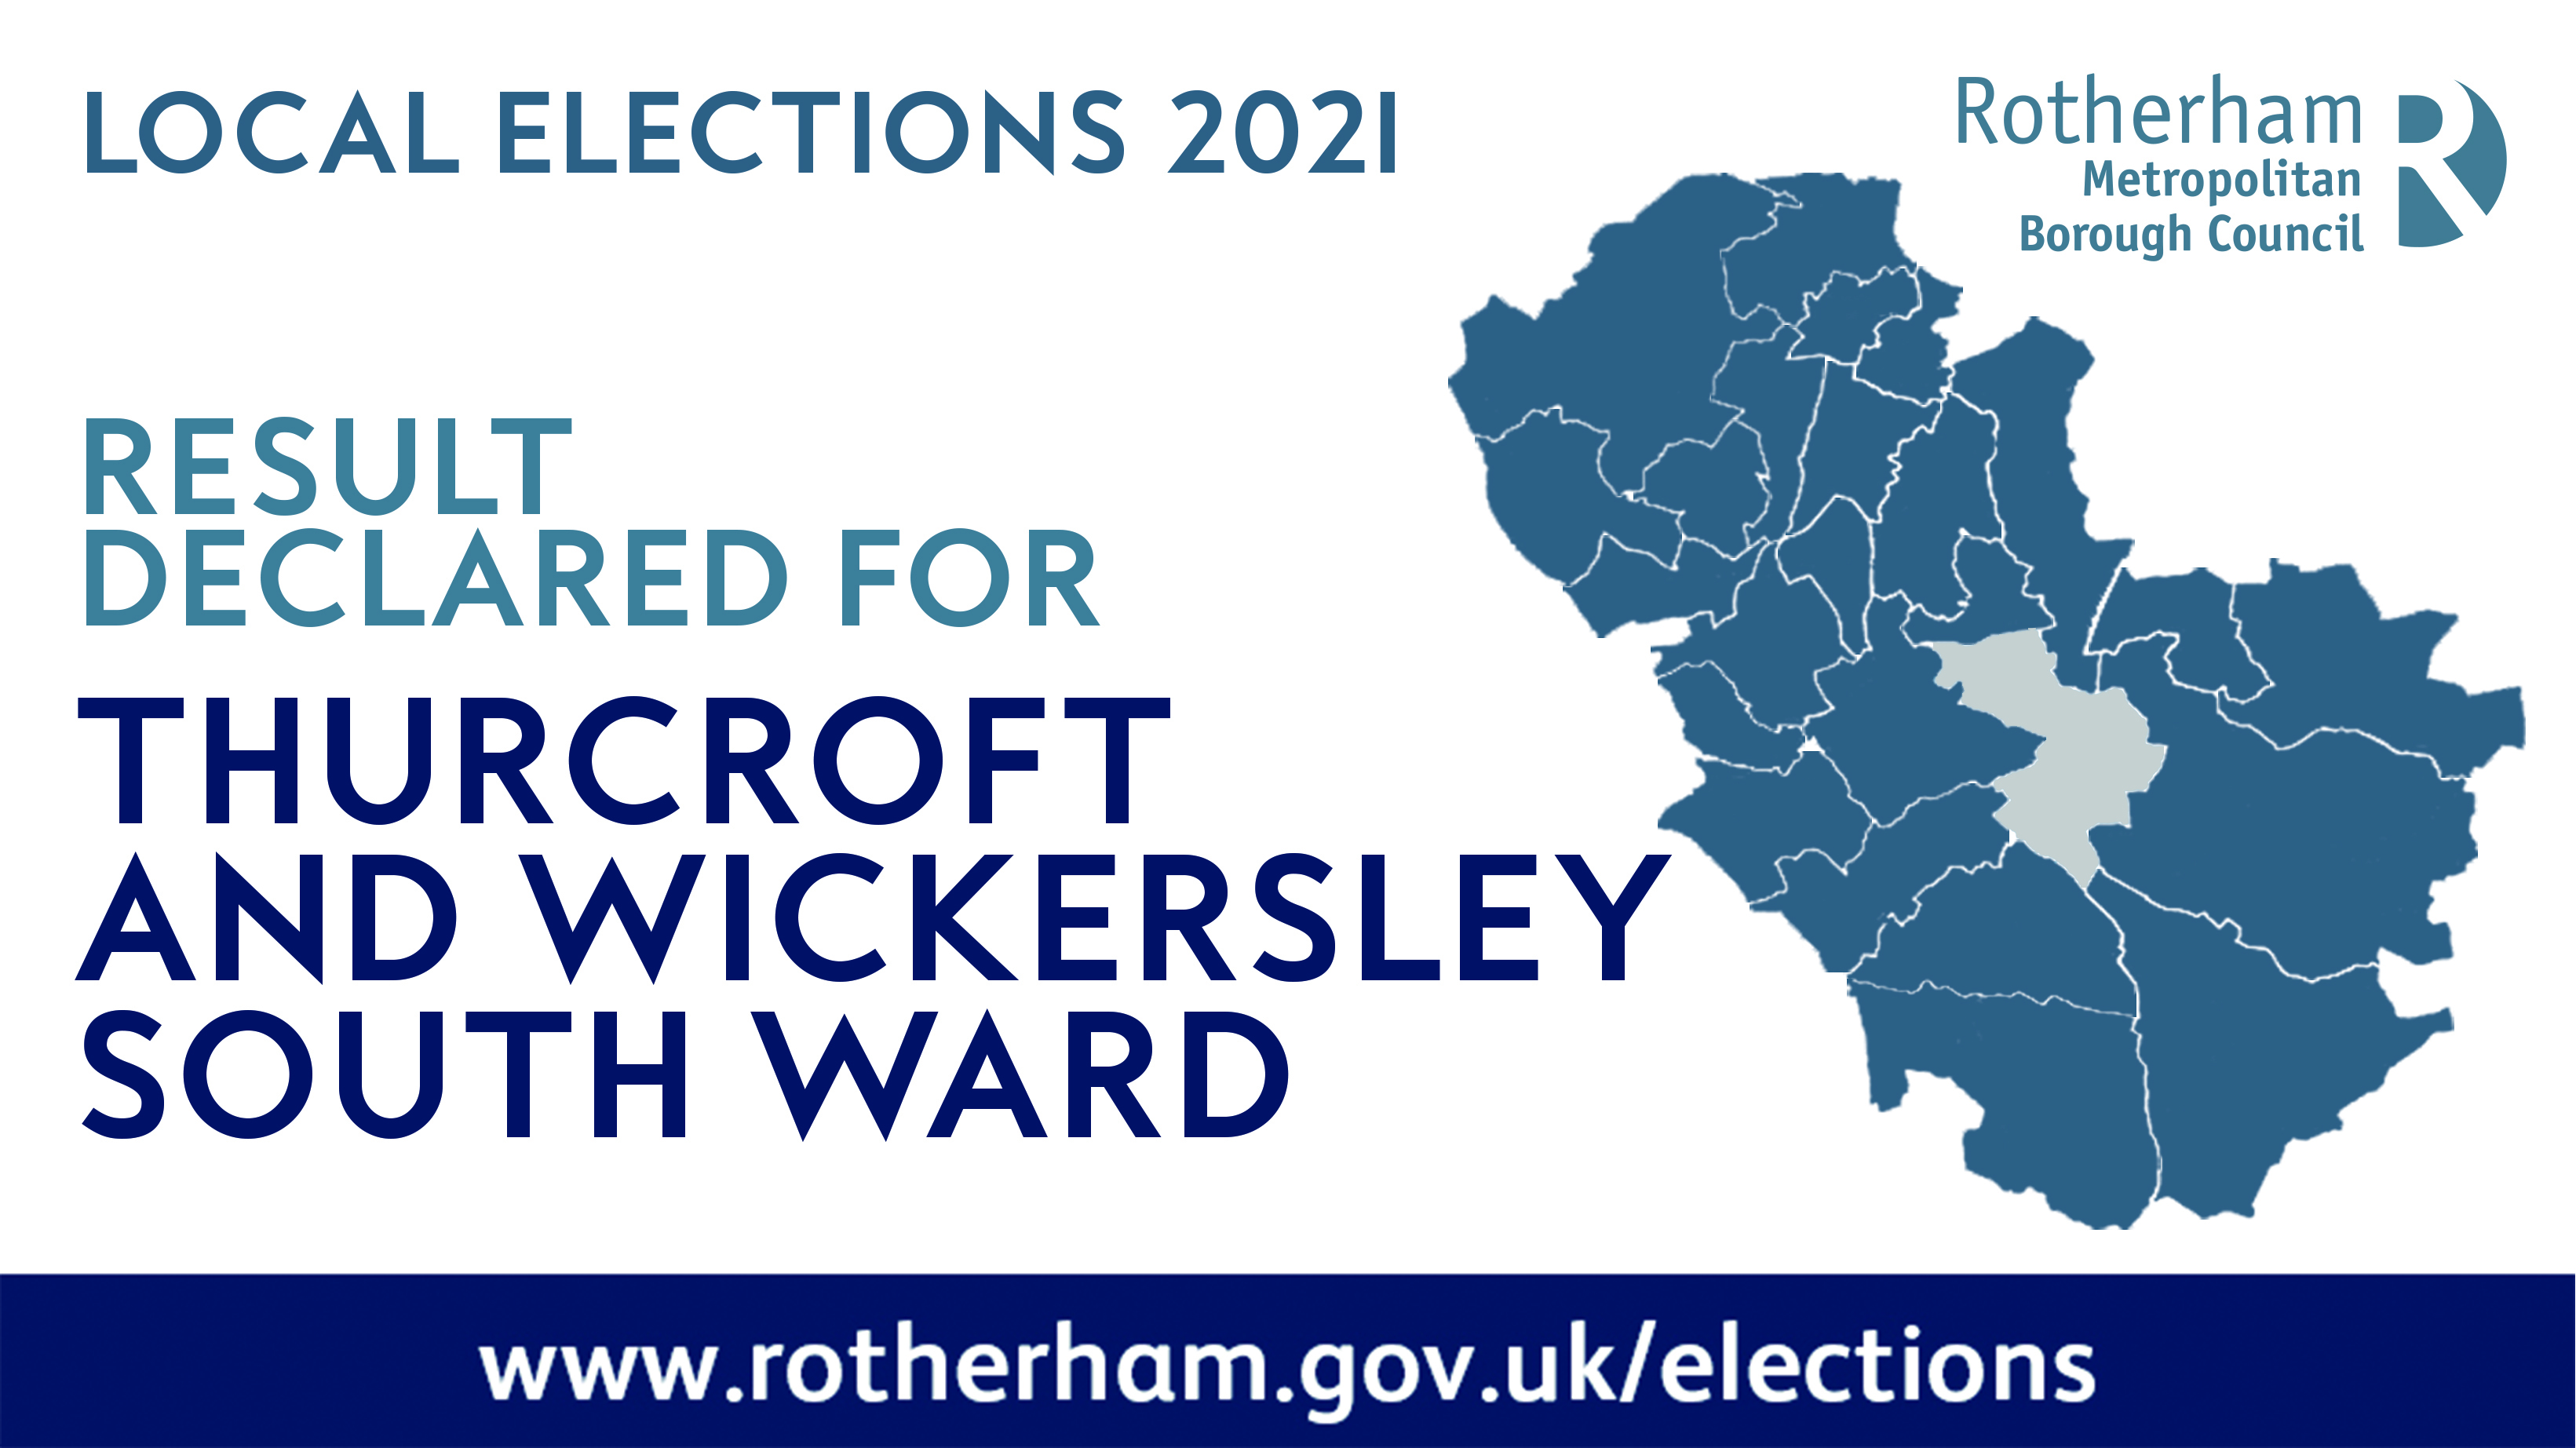 Proposed polling districts and polling places for Thurcroft and wickersley south